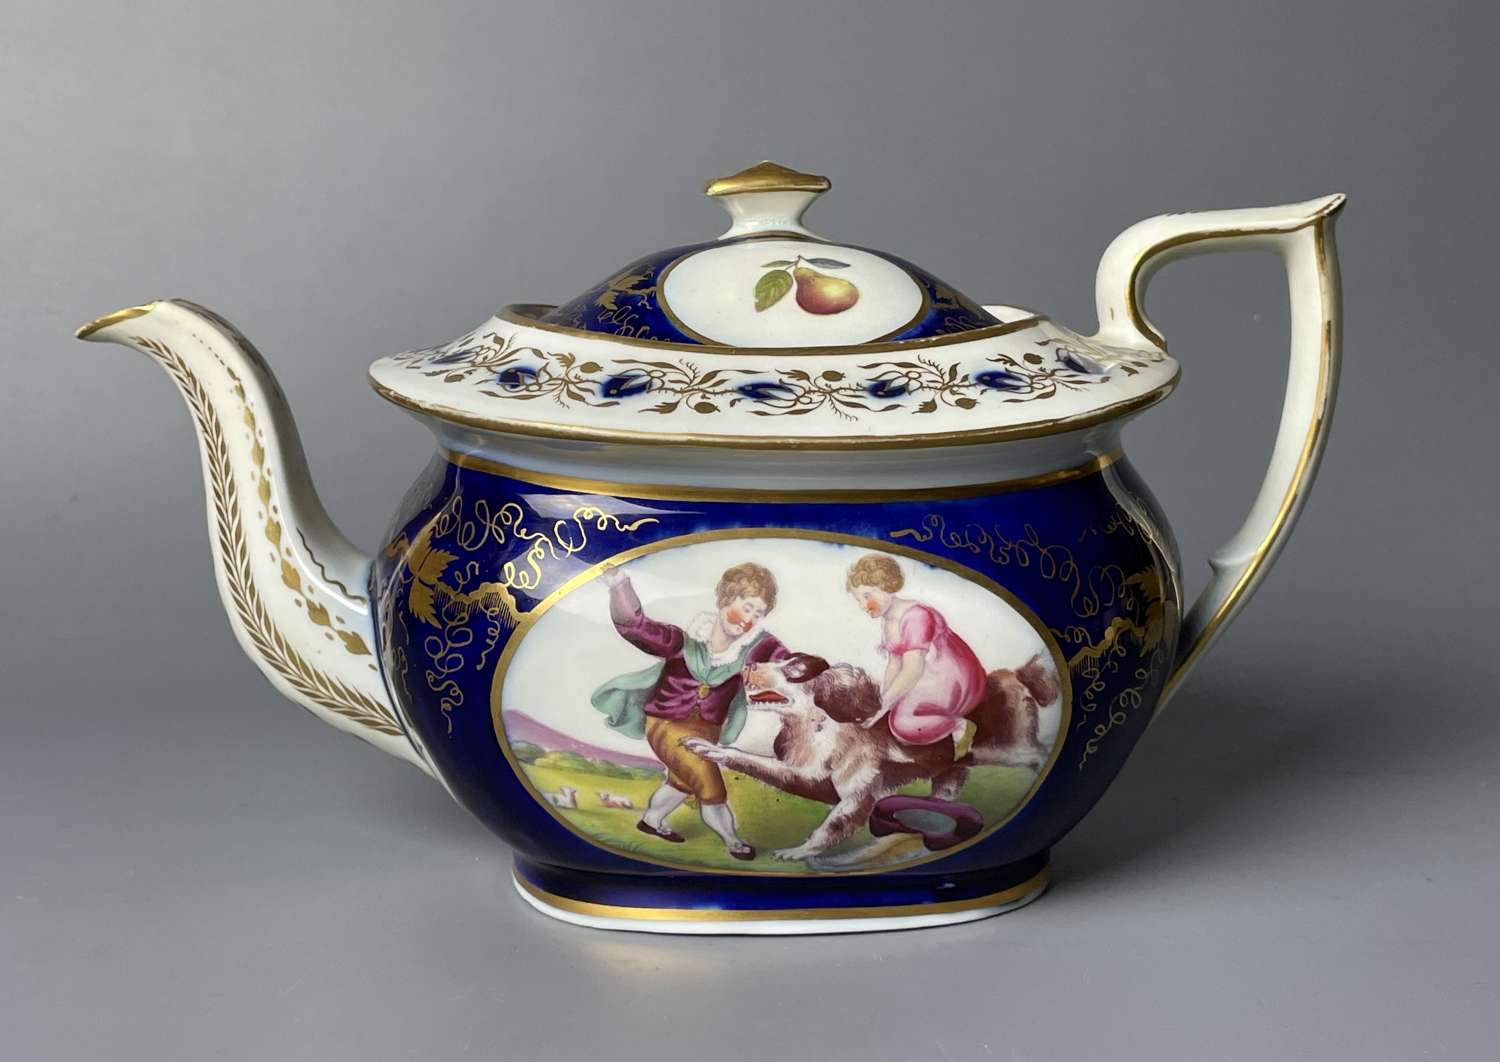 Regency Newhall Porcelain Teapot & Cover